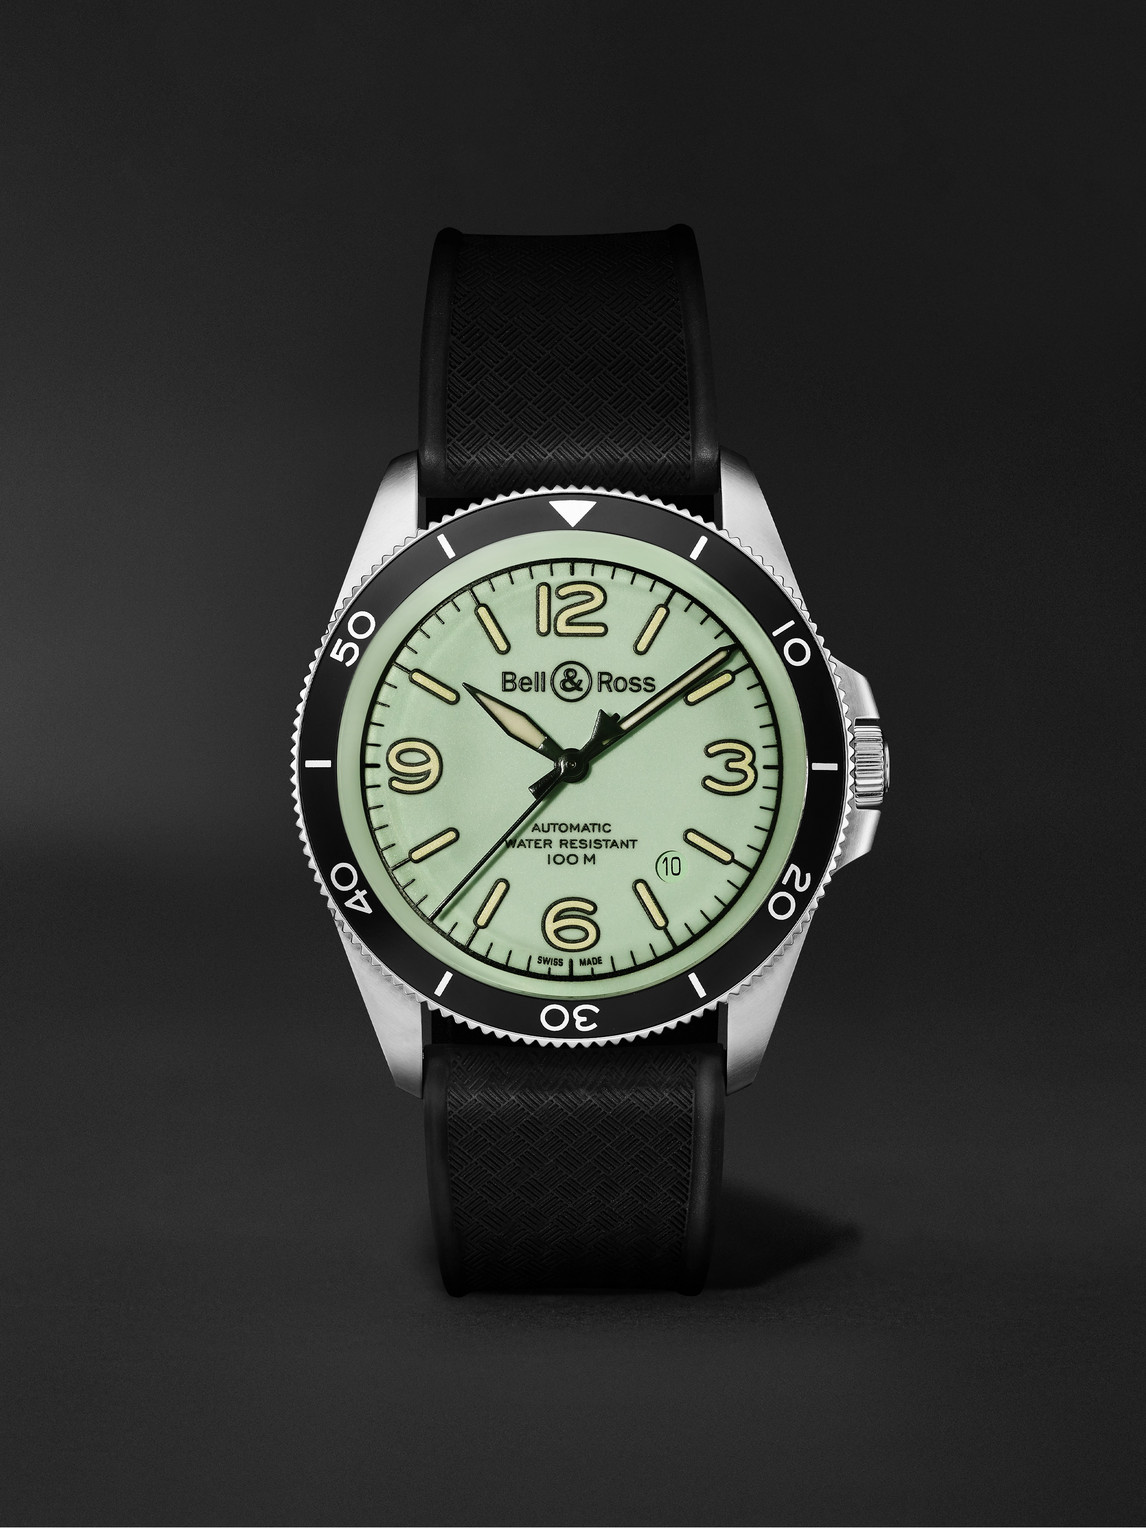 BR V2-92 Full Lum Limited Edition Automatic 41mm Stainless Steel and Rubber Watch, Ref. No. BRV292-LUM-ST/SRB